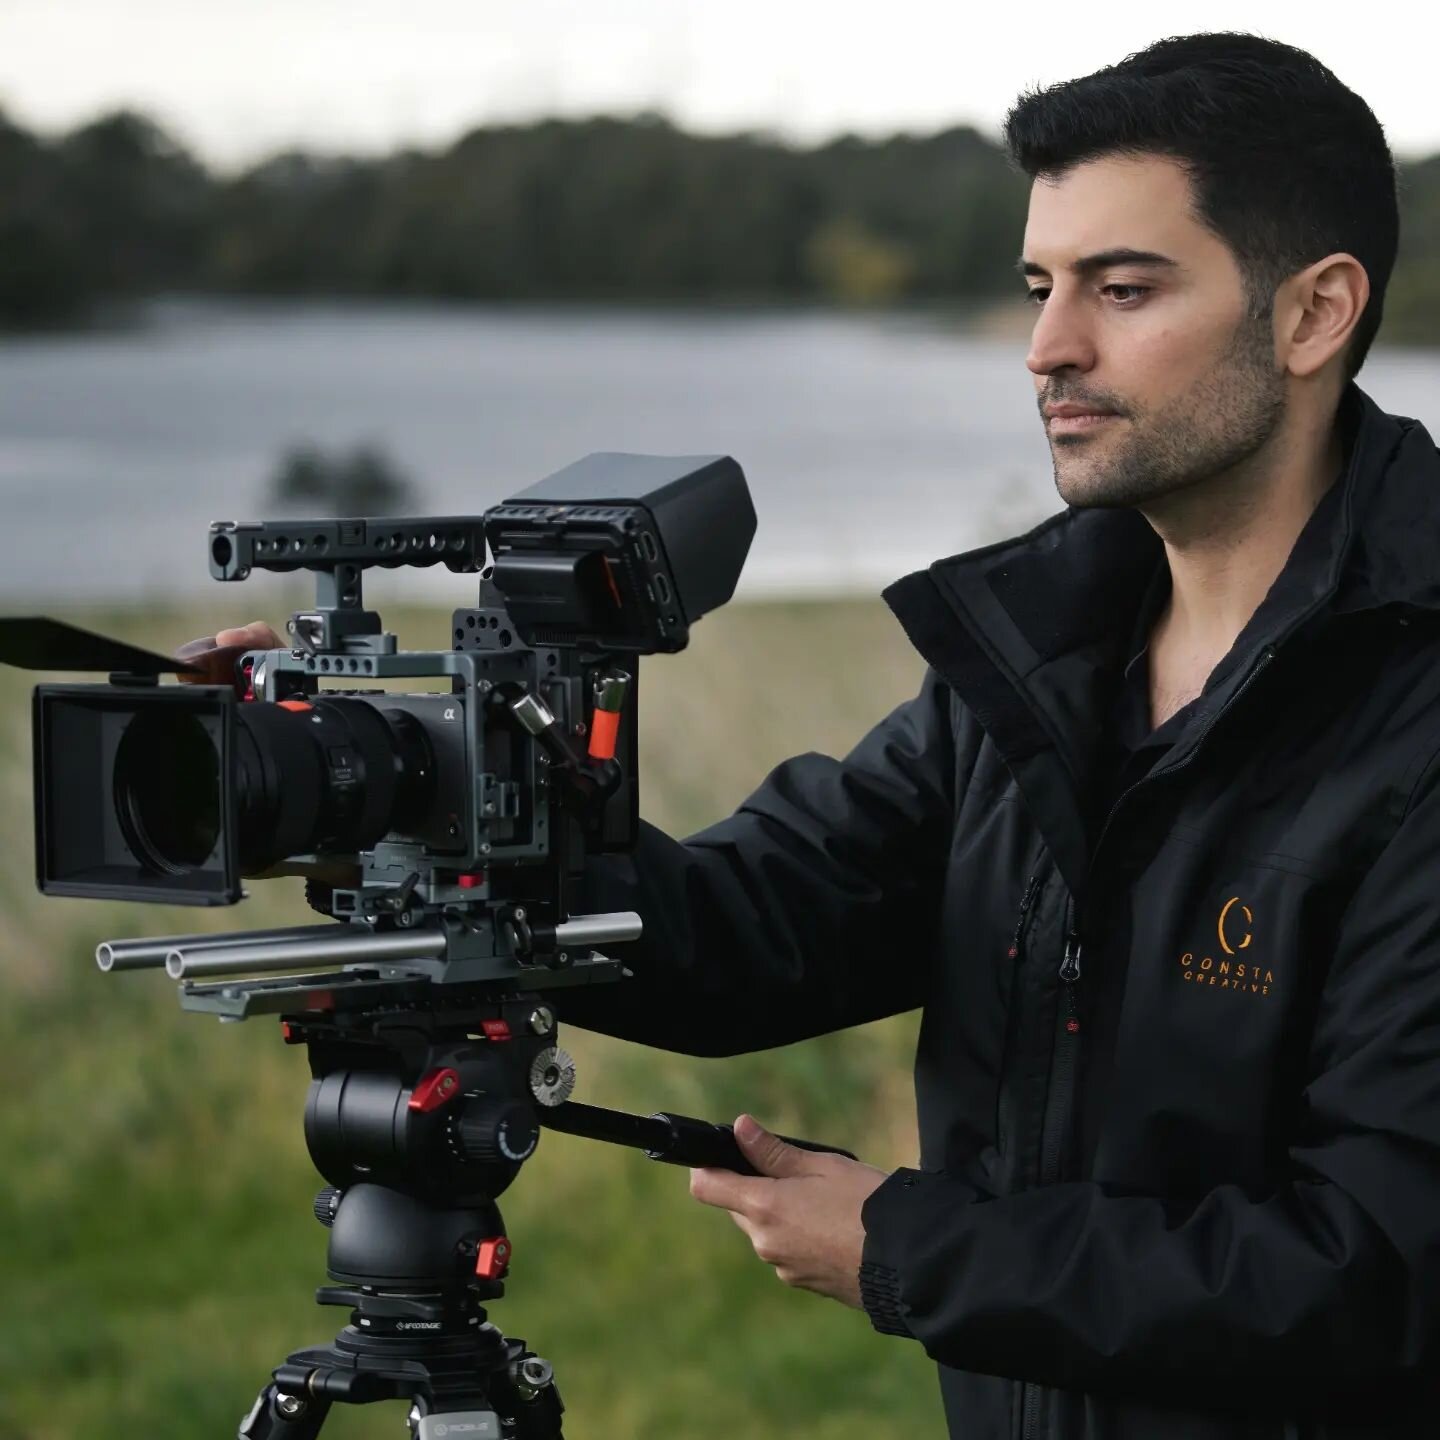 I&rsquo;ve been so fortunate over the last few years to build such great relationships with amazing people and businesses. This has brought my filmmaking to greater heights taking me all over Australia and overseas. A big thank you to all my clients 